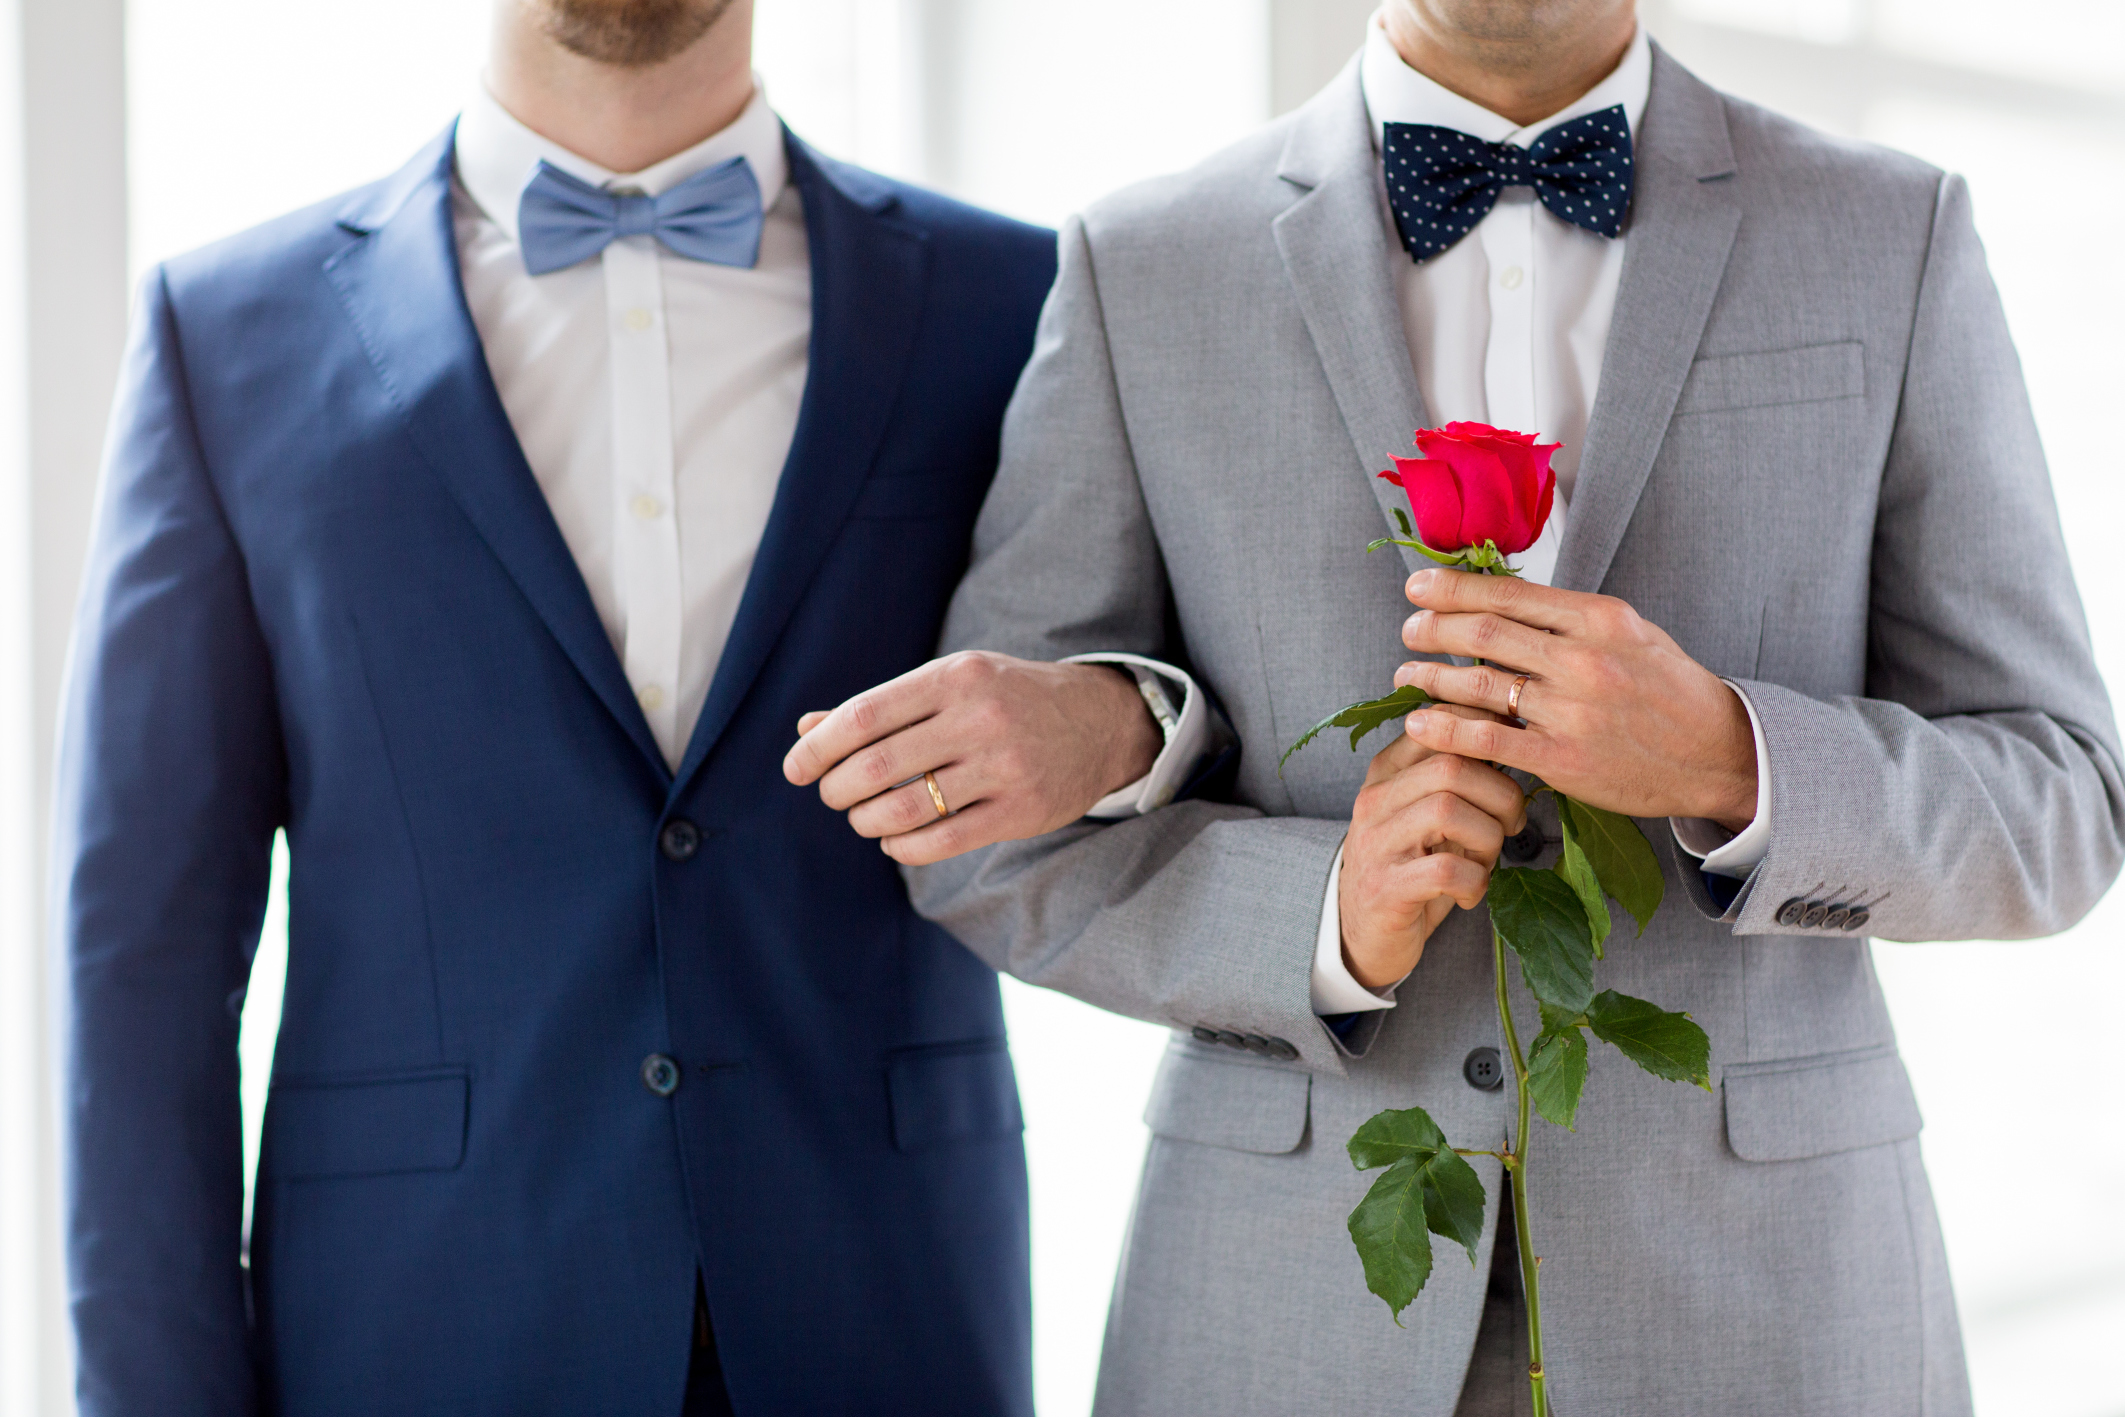 Two men standing next to each other in suits.  Both wearing wedding bands and their arms interlocked.  One man is holding a red rose